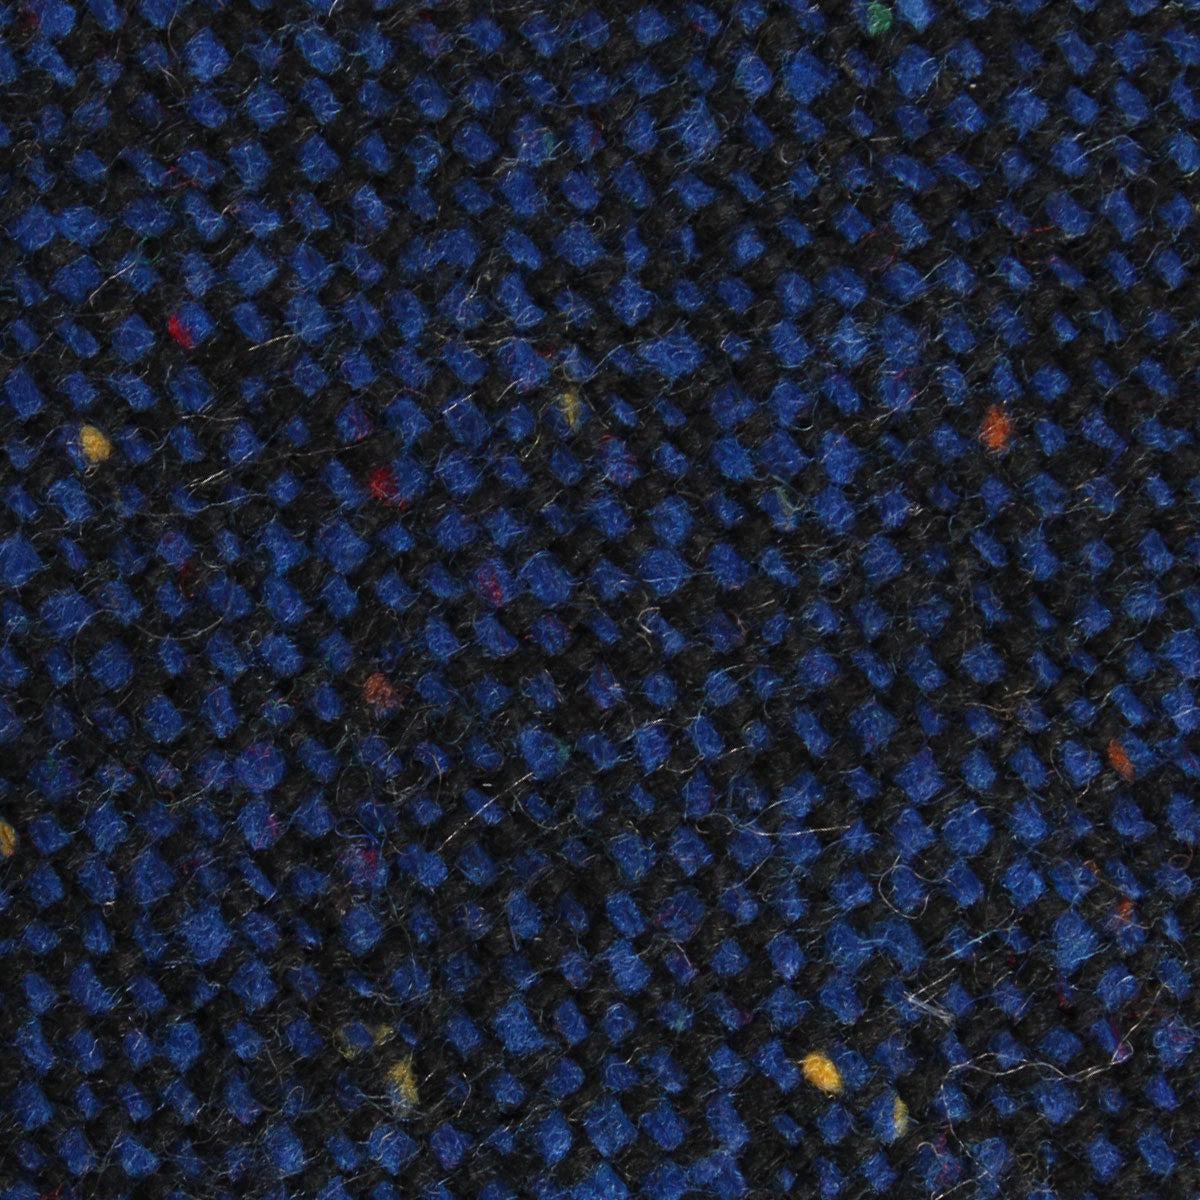 Speckles on Blue Donegal Fabric Skinny Tie